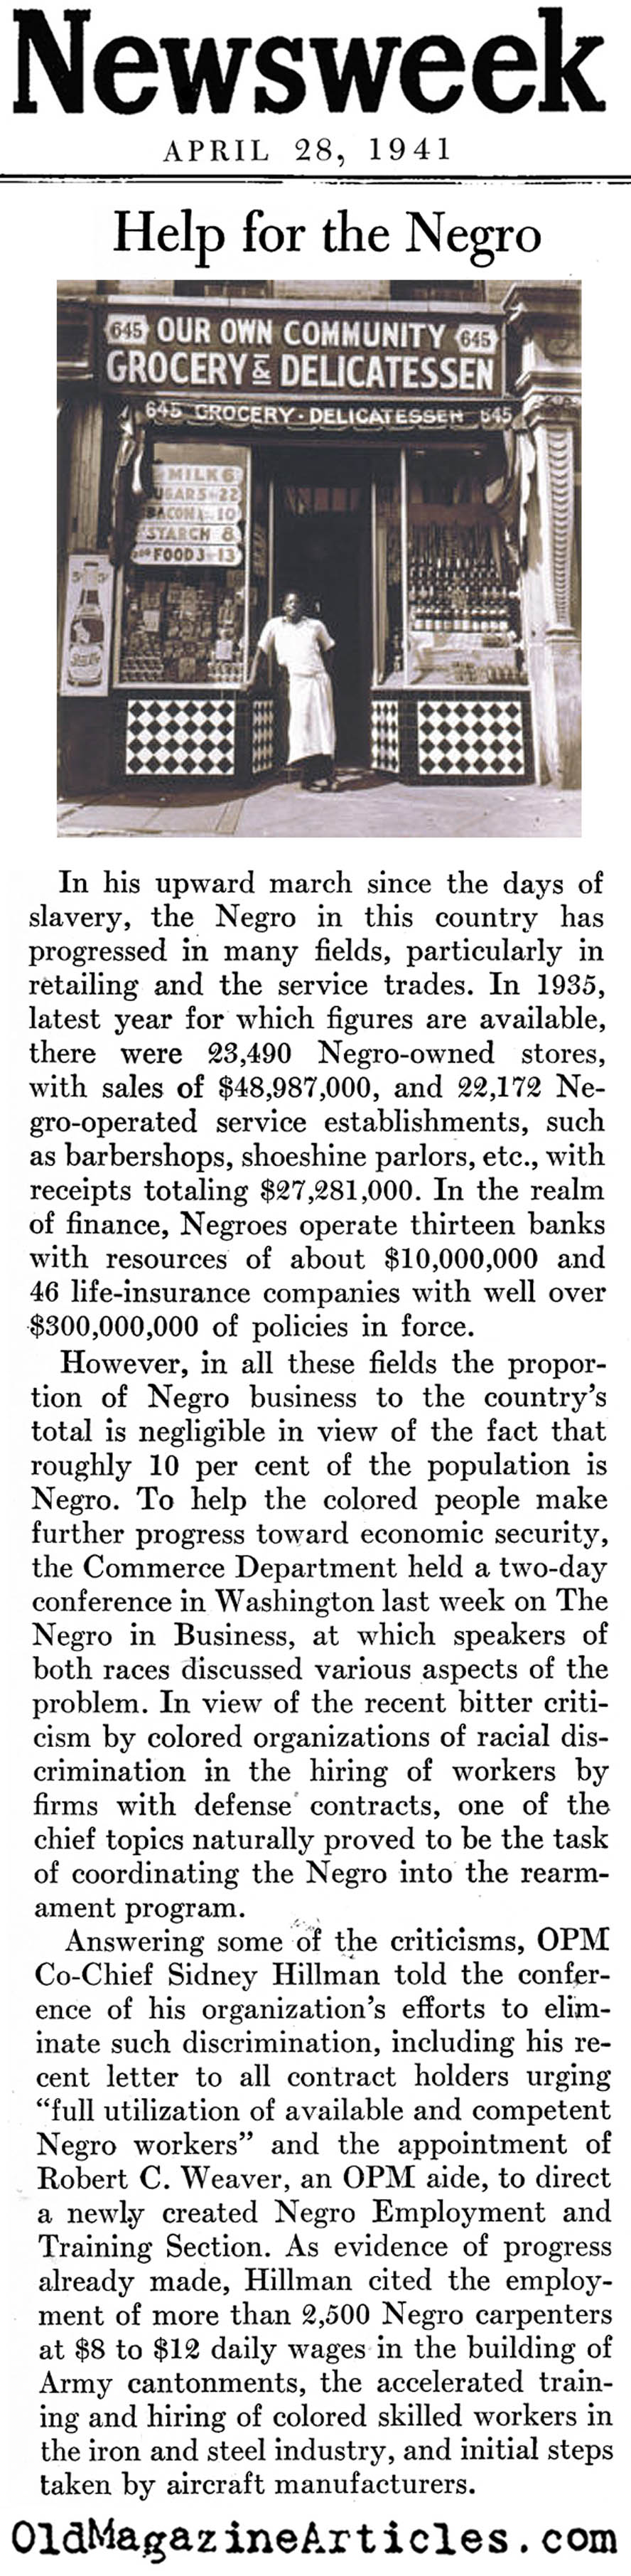 Black-Owned Businesses and the War Effort (Newsweek Magazine, 1941)